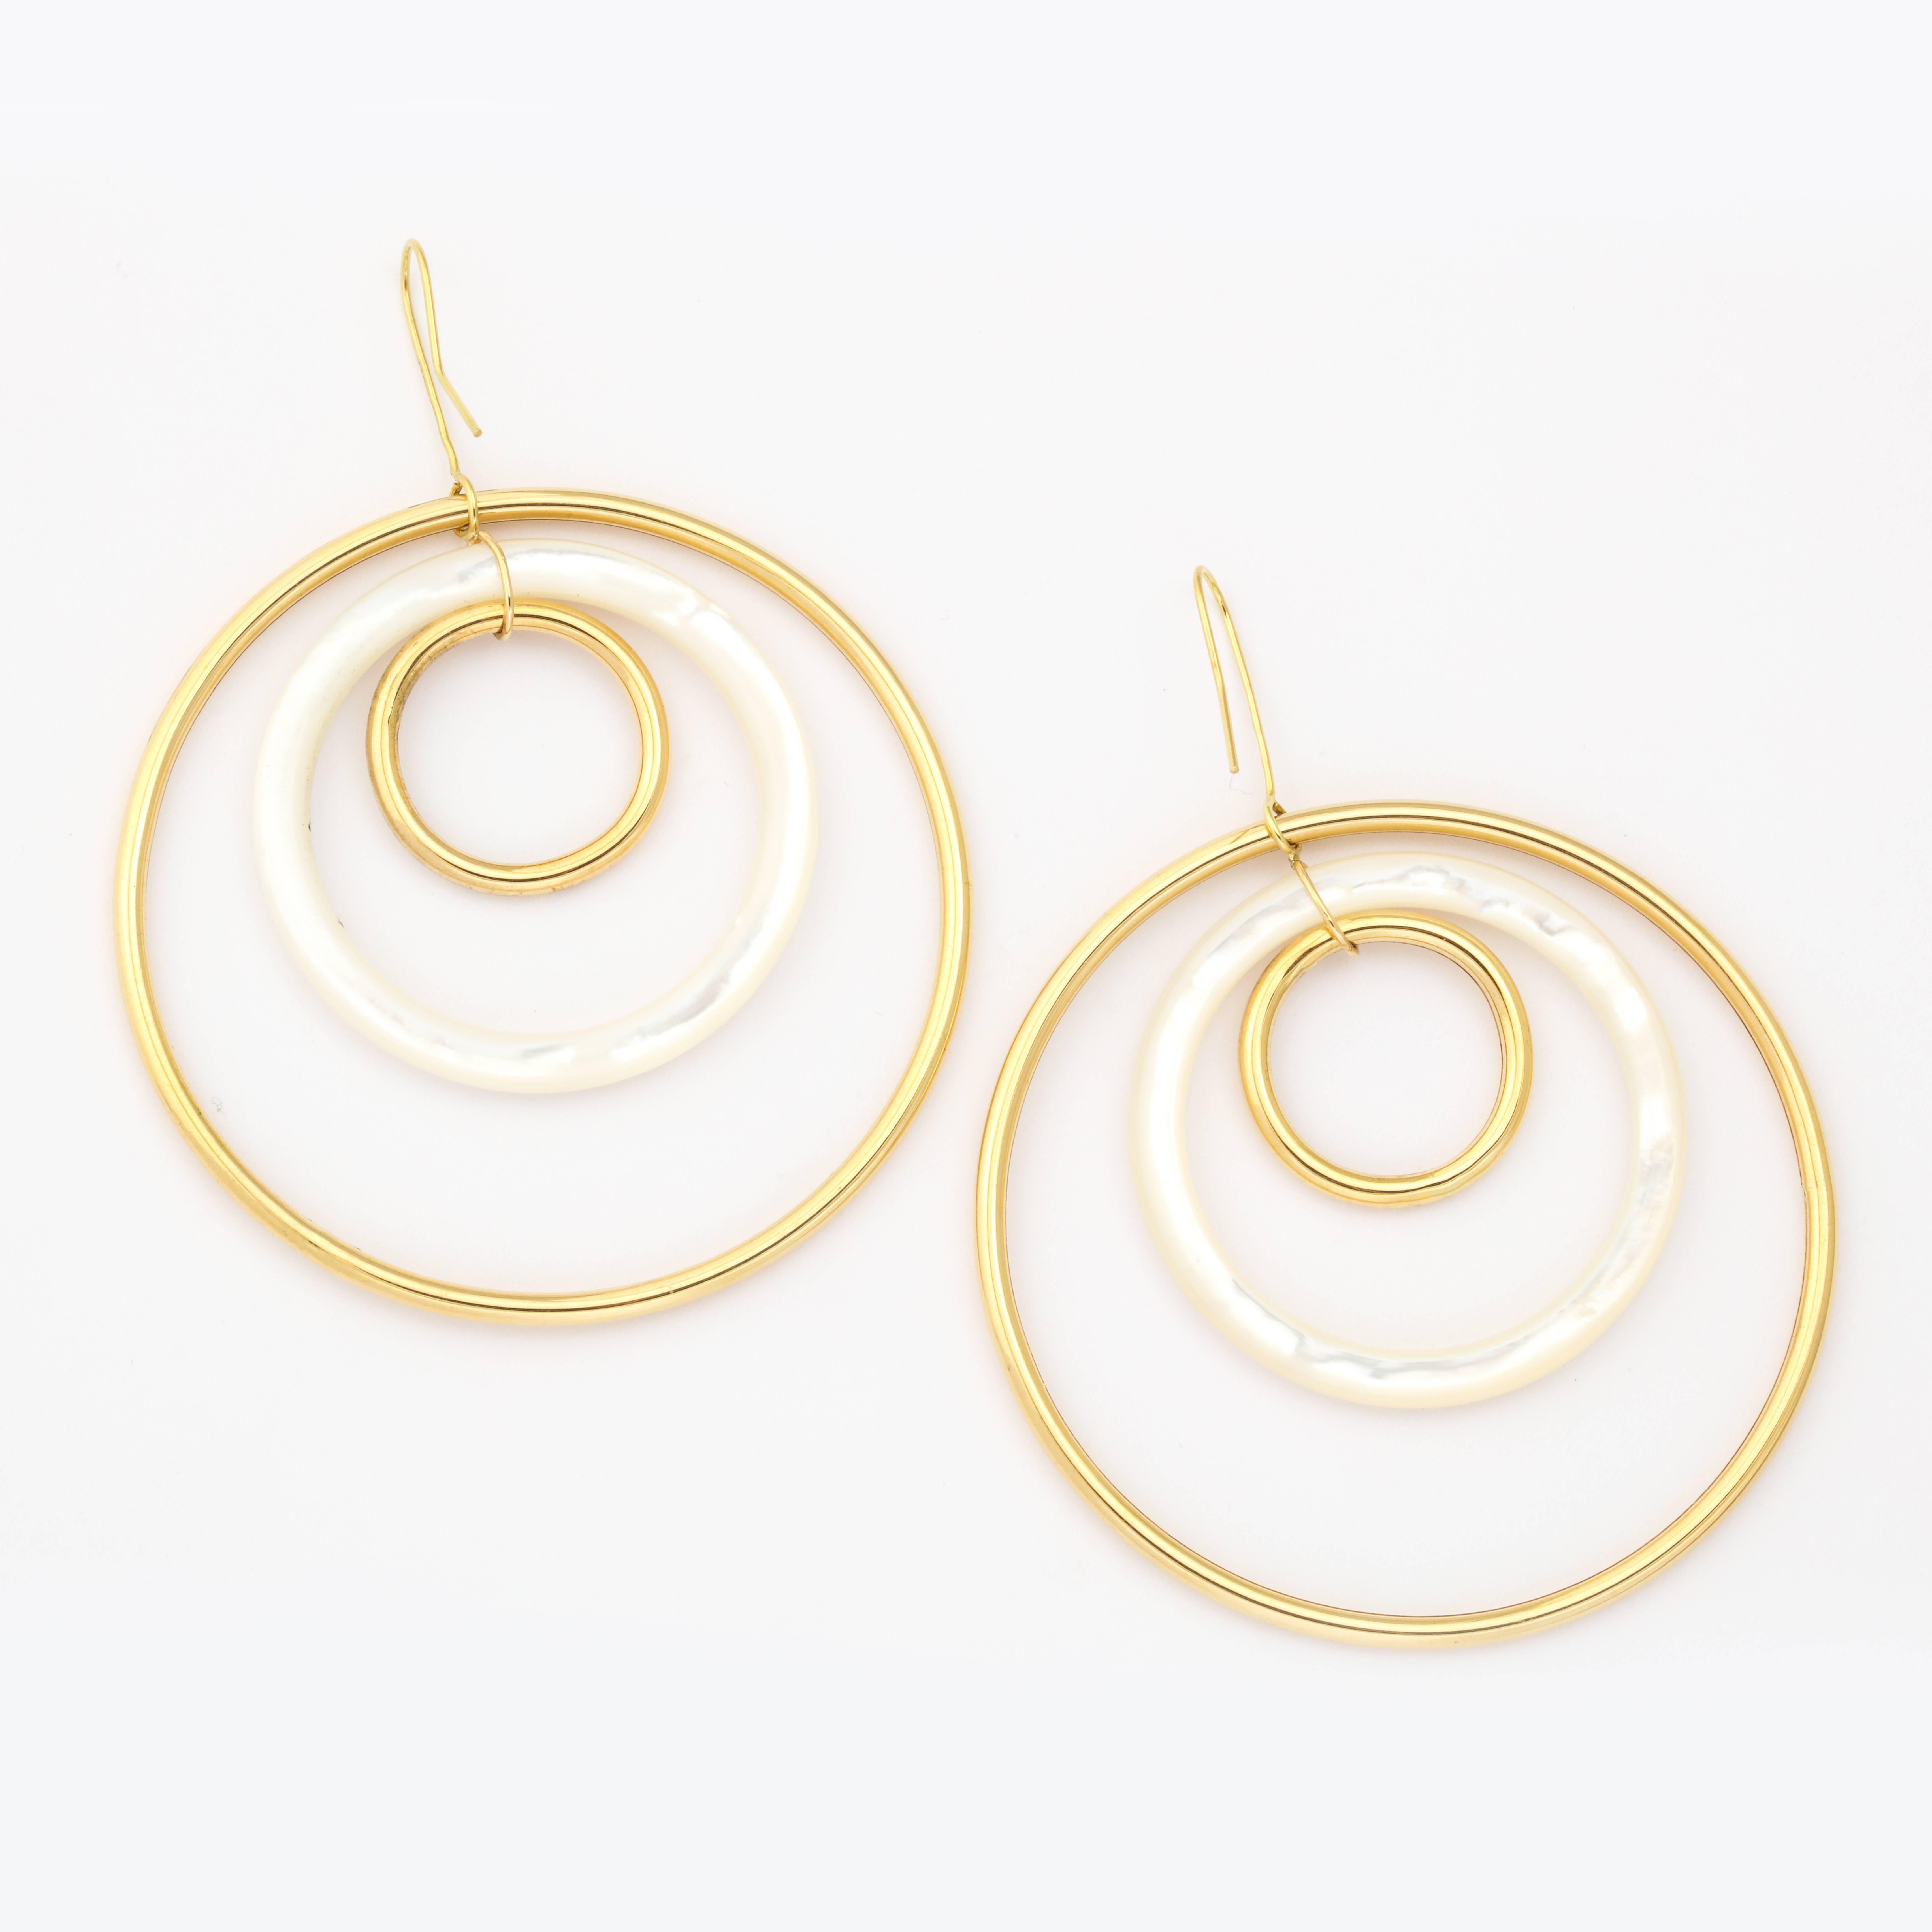 18k yellow gold earrings with mother-of-pearl ceramic links.